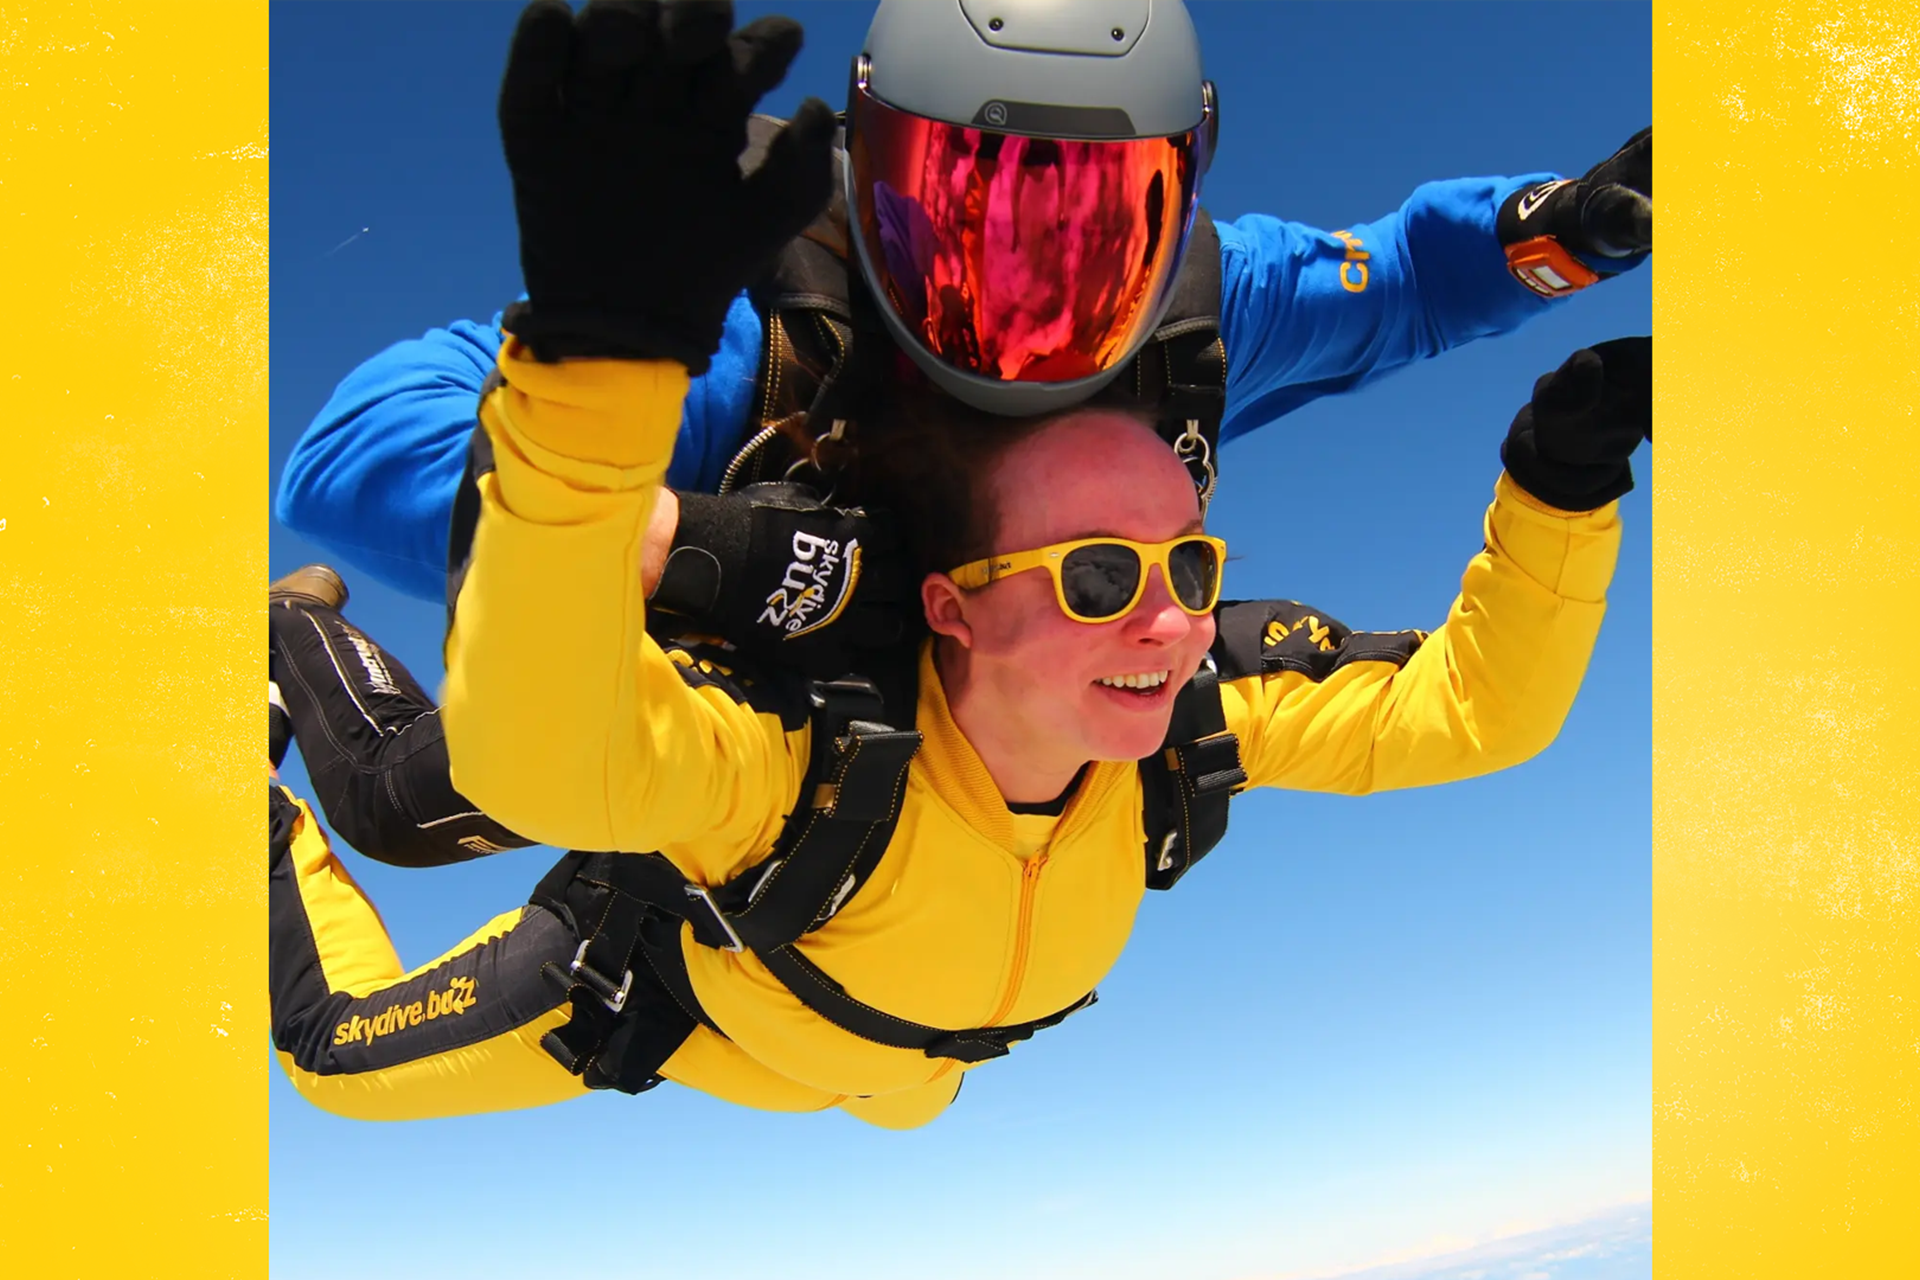 Our fundraiser Laura skydiving with an instructor.